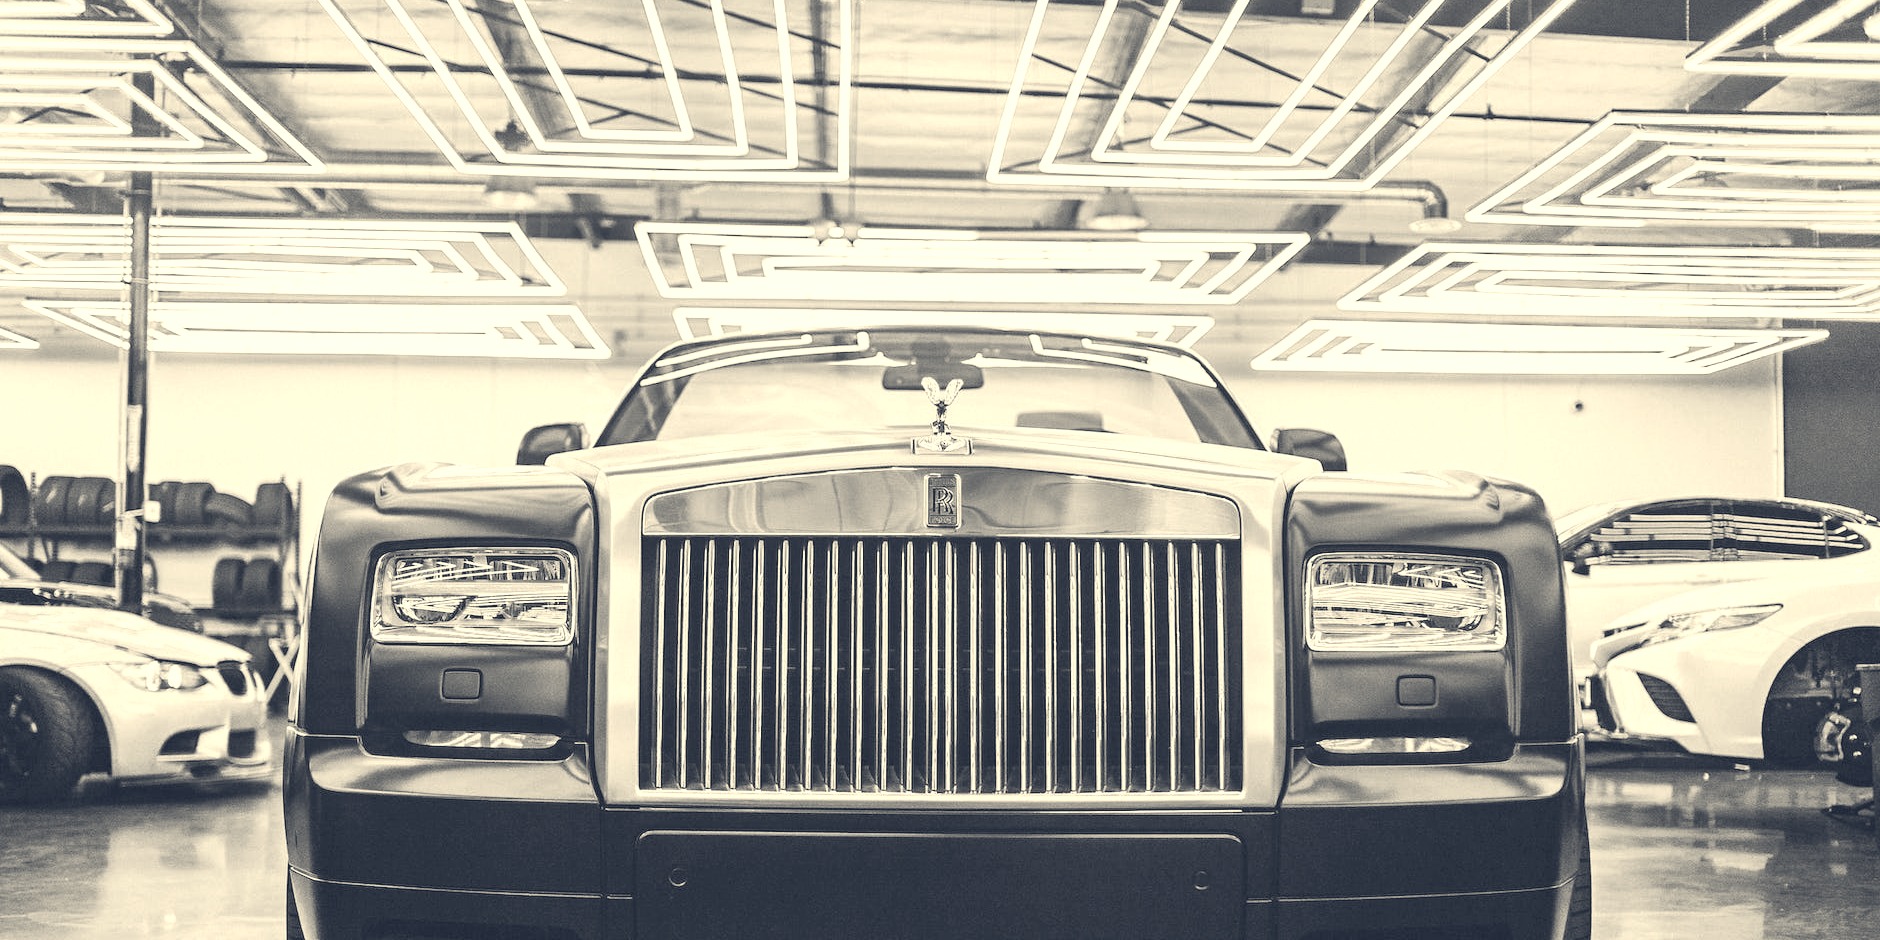 Top Maintenance Tips to Keep Your Rolls Royce Phantom in Pristine Condition